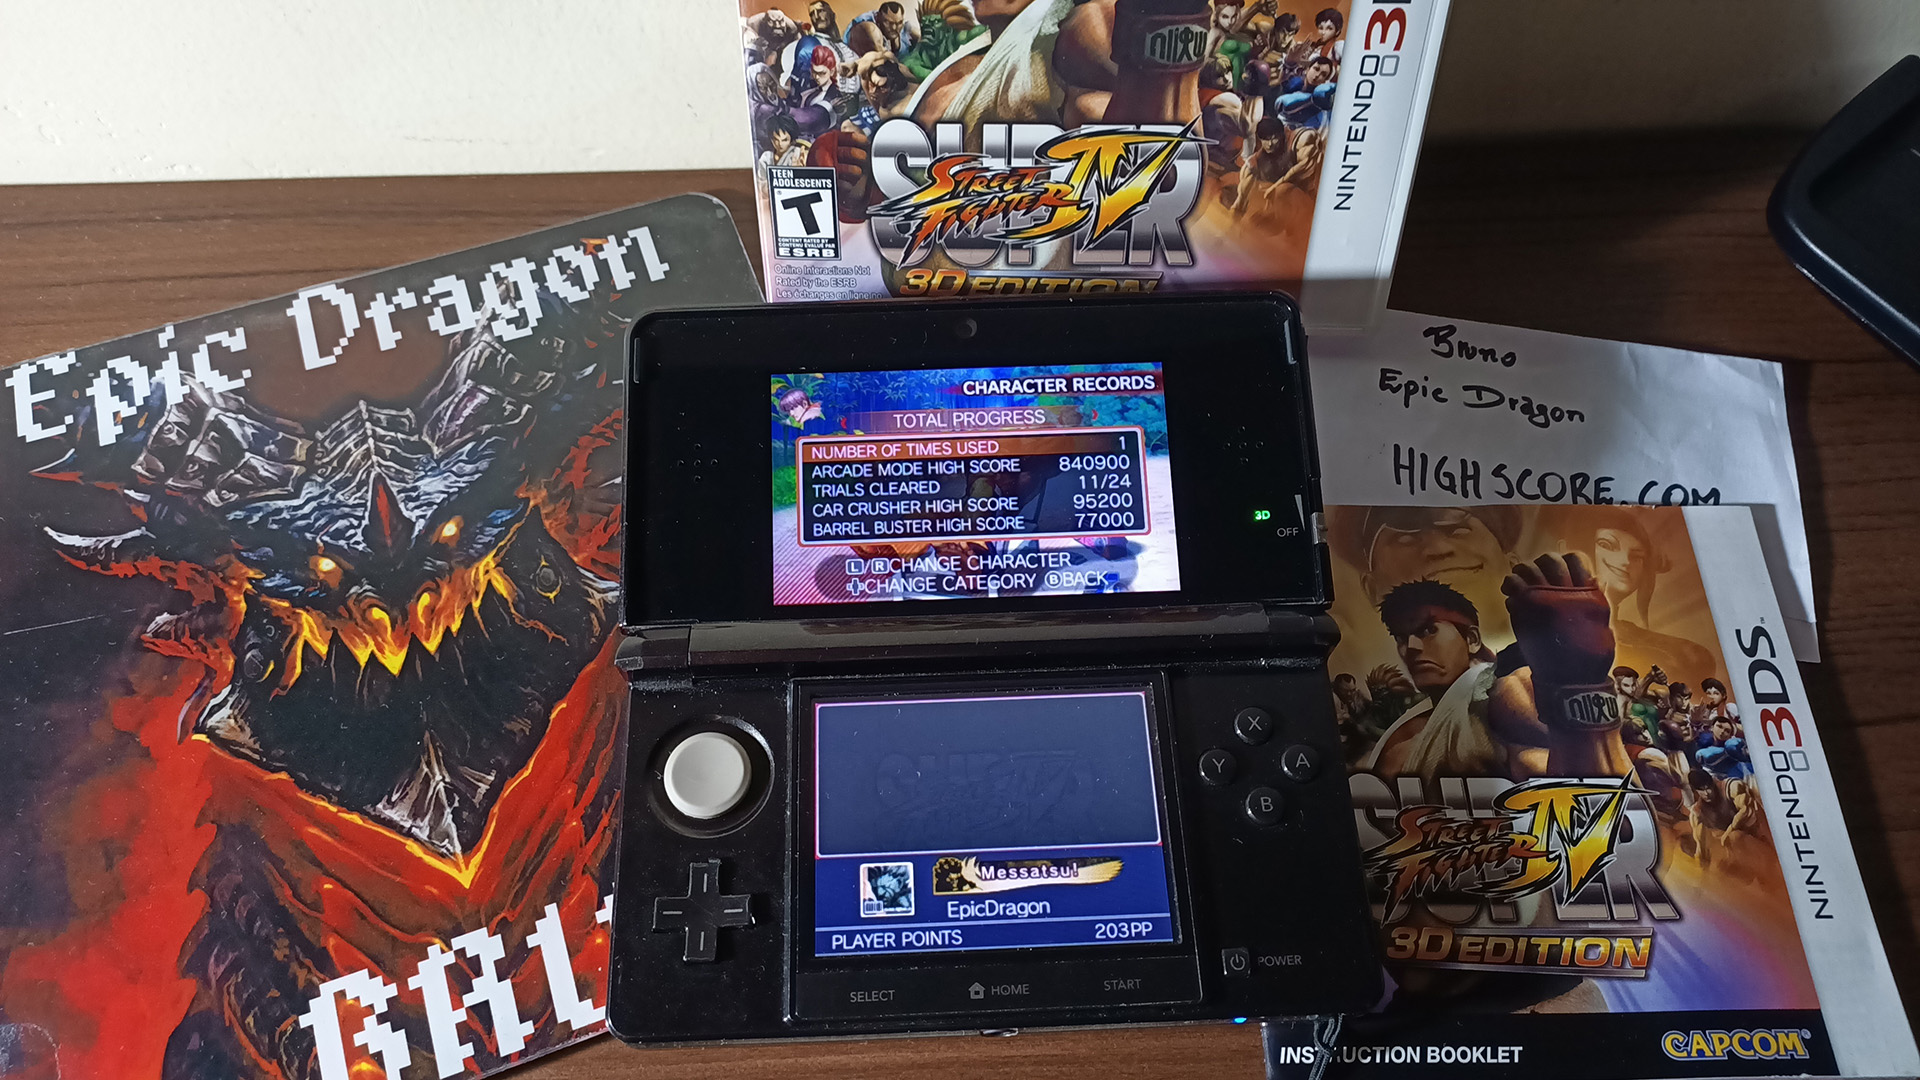 Super Street Fighter IV 3D Edition: Arcade: Guy 840,900 points